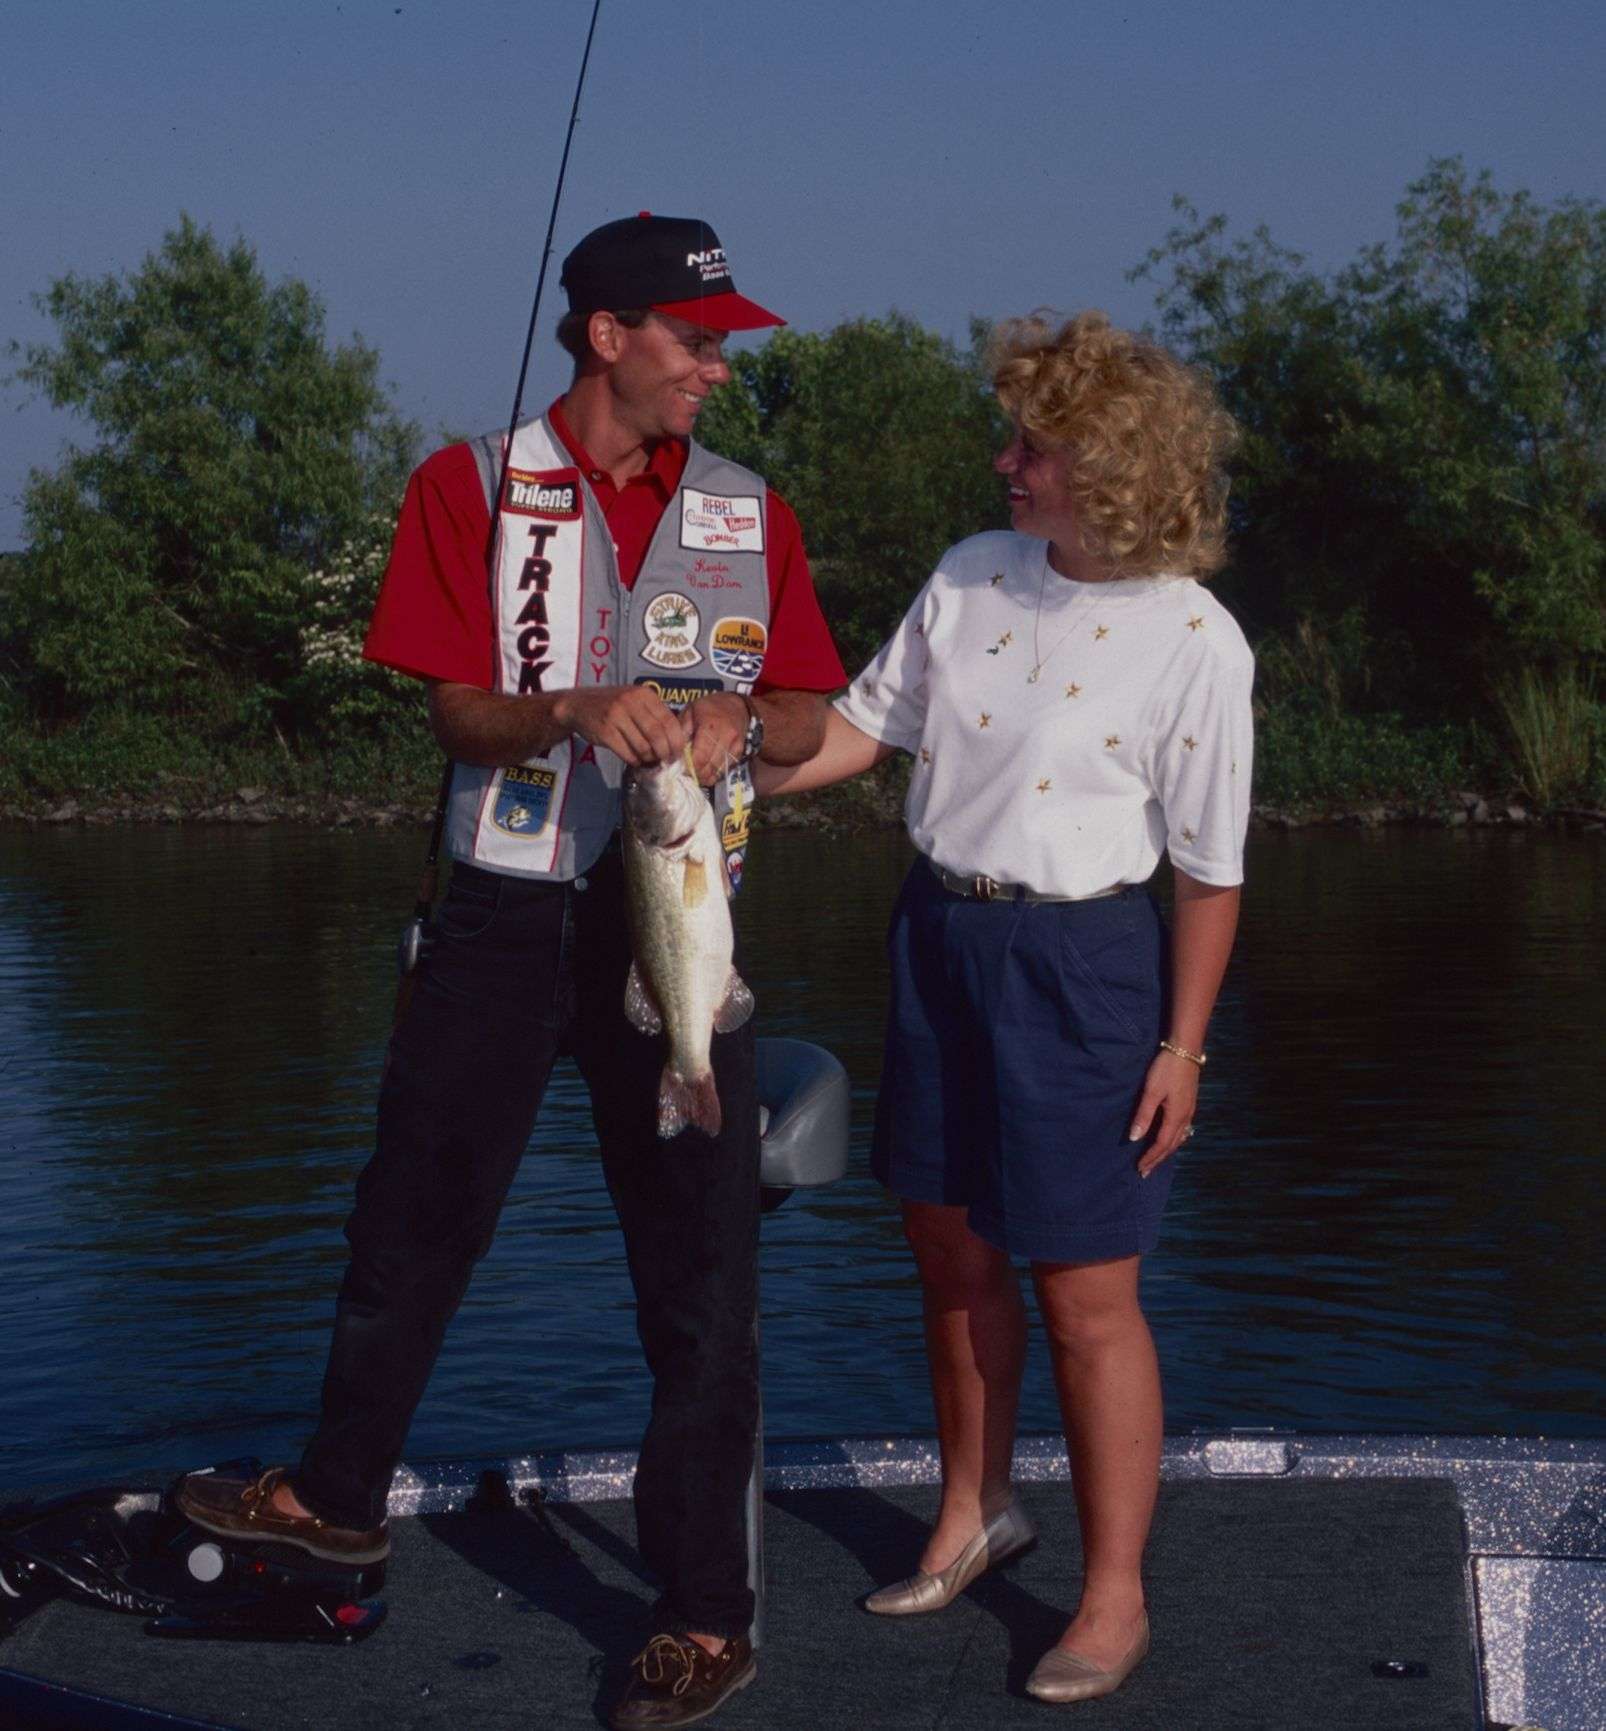 Throughout his career, Kevin VanDam's wife Sherry has been by his side. In this photo from 1996, the two pose for photos on Lake Eufaula. 